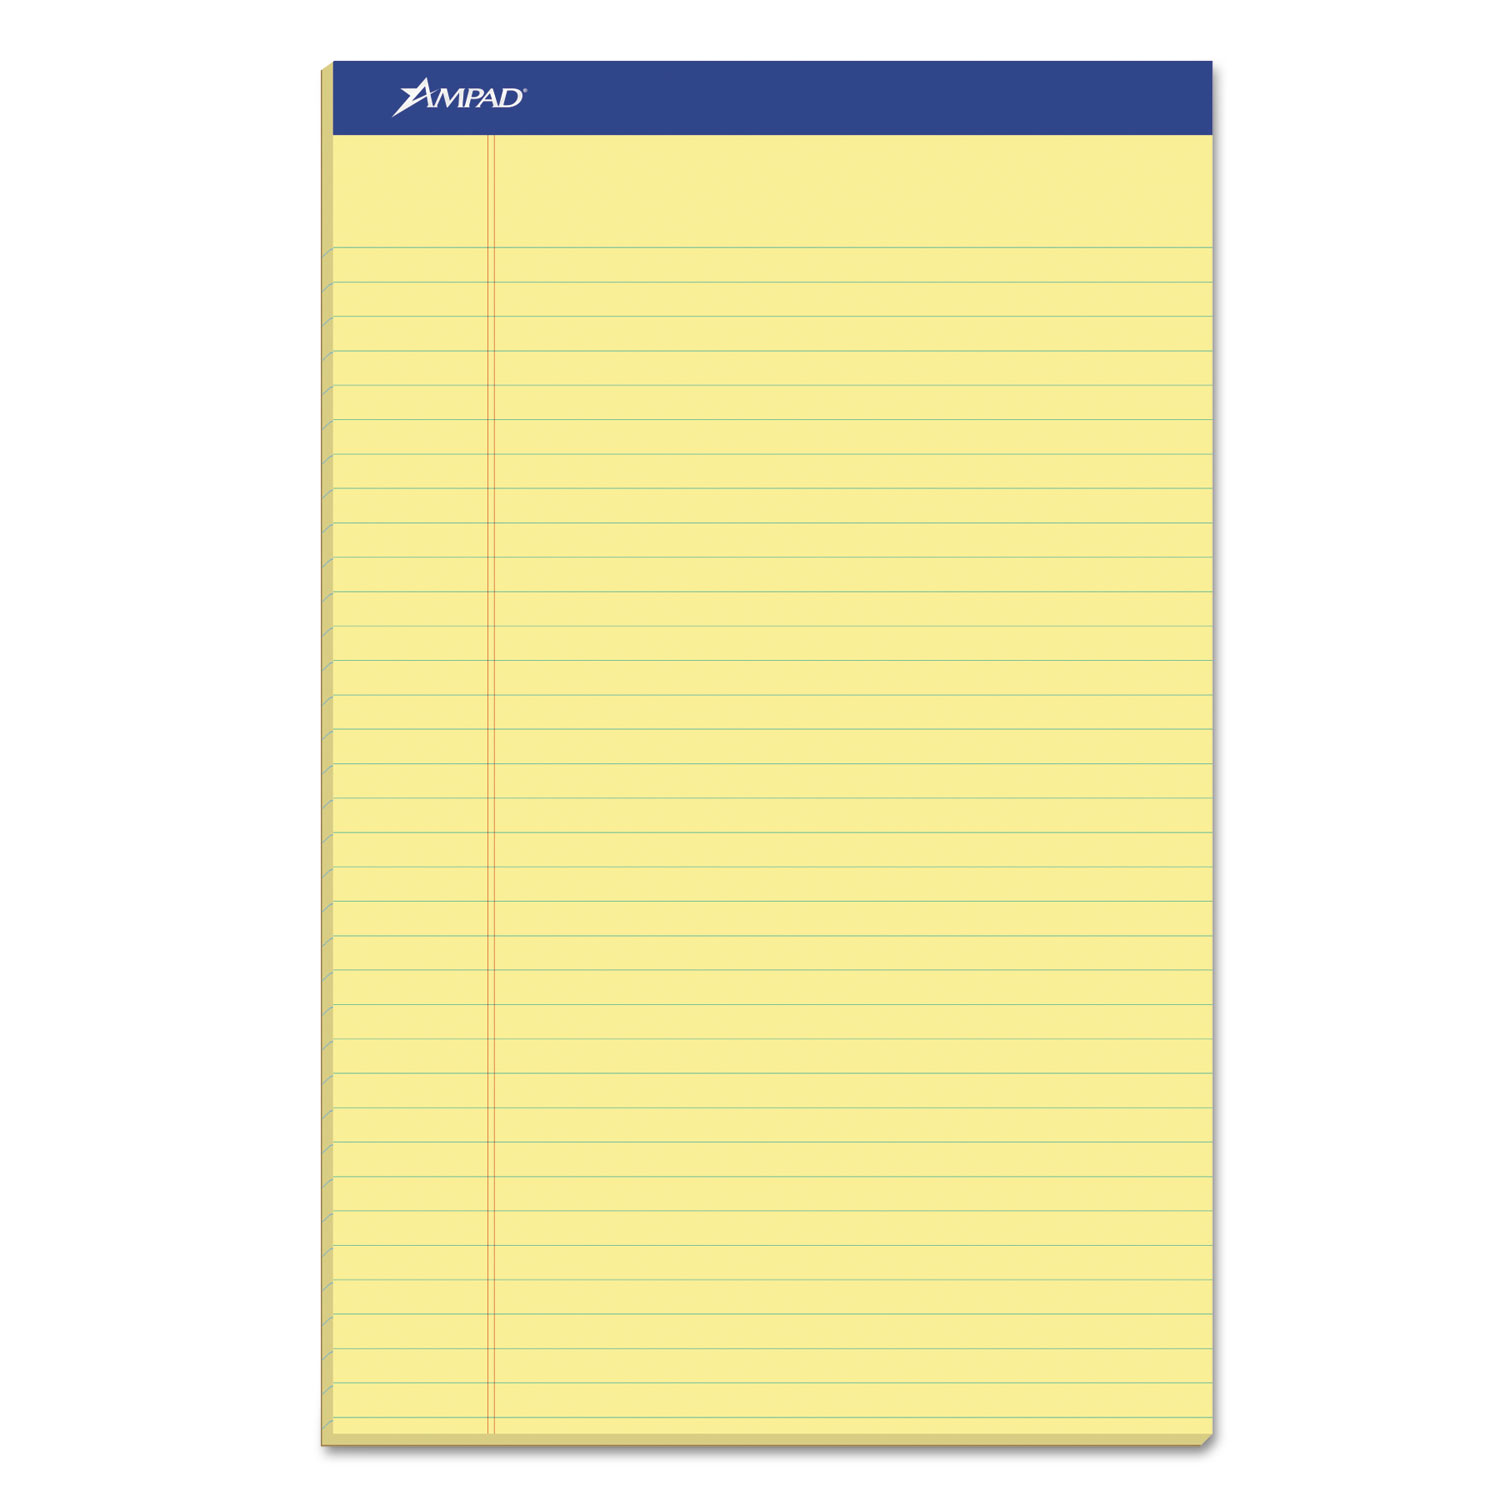  Ampad 20-280 Recycled Writing Pads, Wide/Legal Rule, 8.5 x 14, Canary, 50 Sheets, Dozen (TOP20280) 